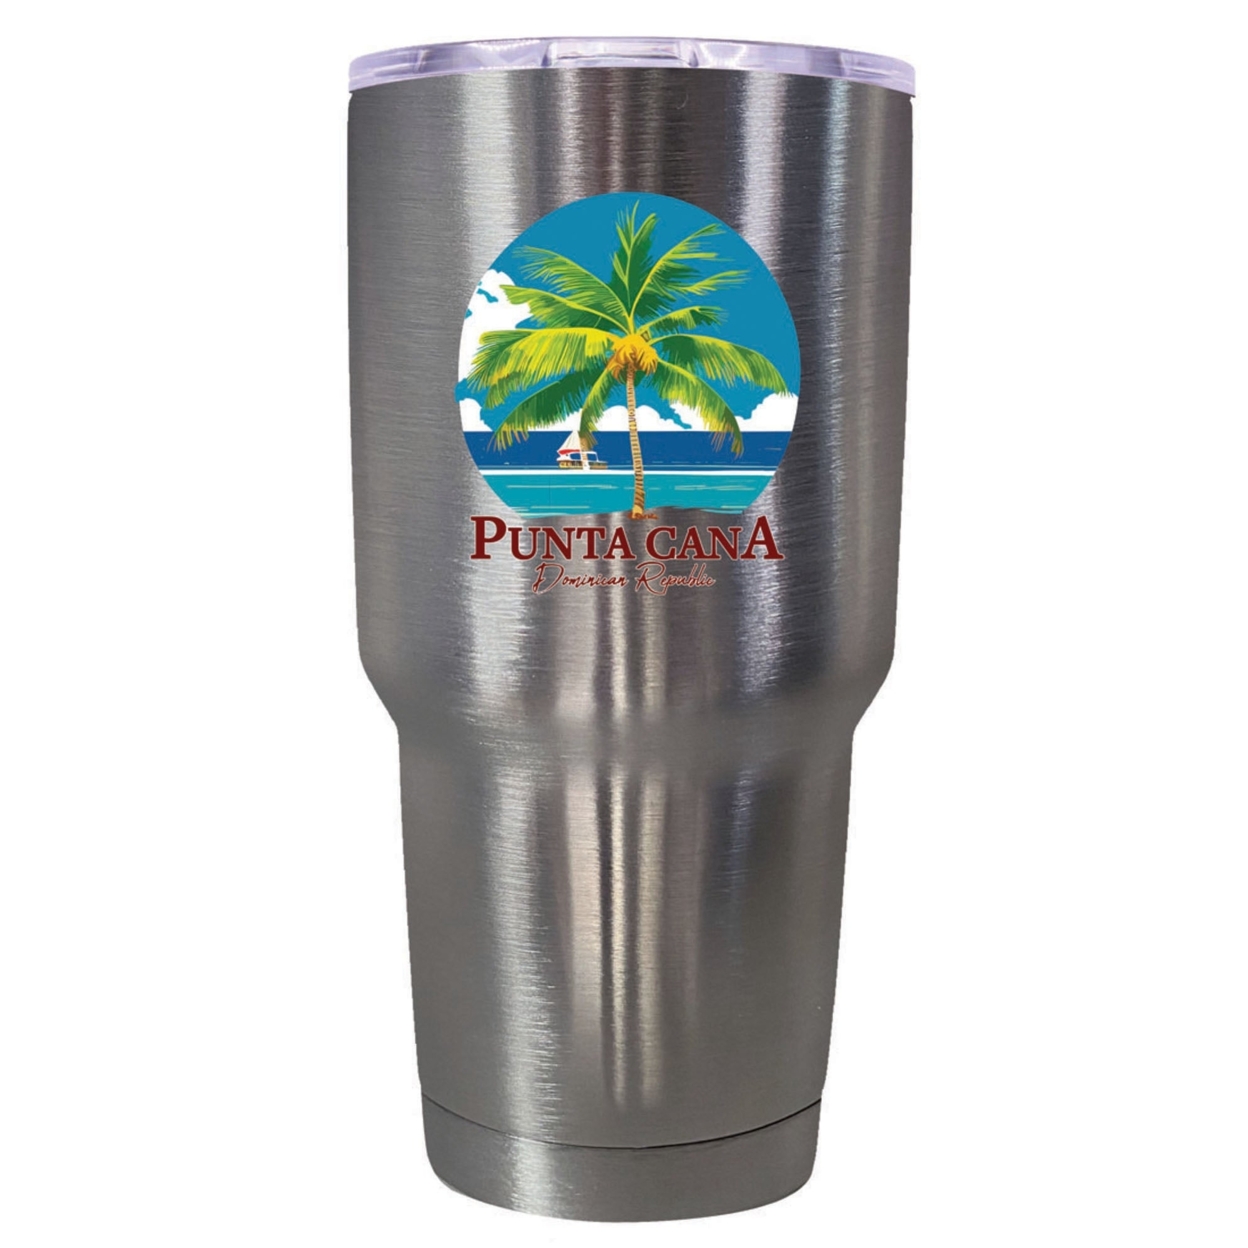 Punta Cana Dominican Republic Souvenir 24 Oz Insulated Stainless Steel Tumbler - Stainless Steel, PALM